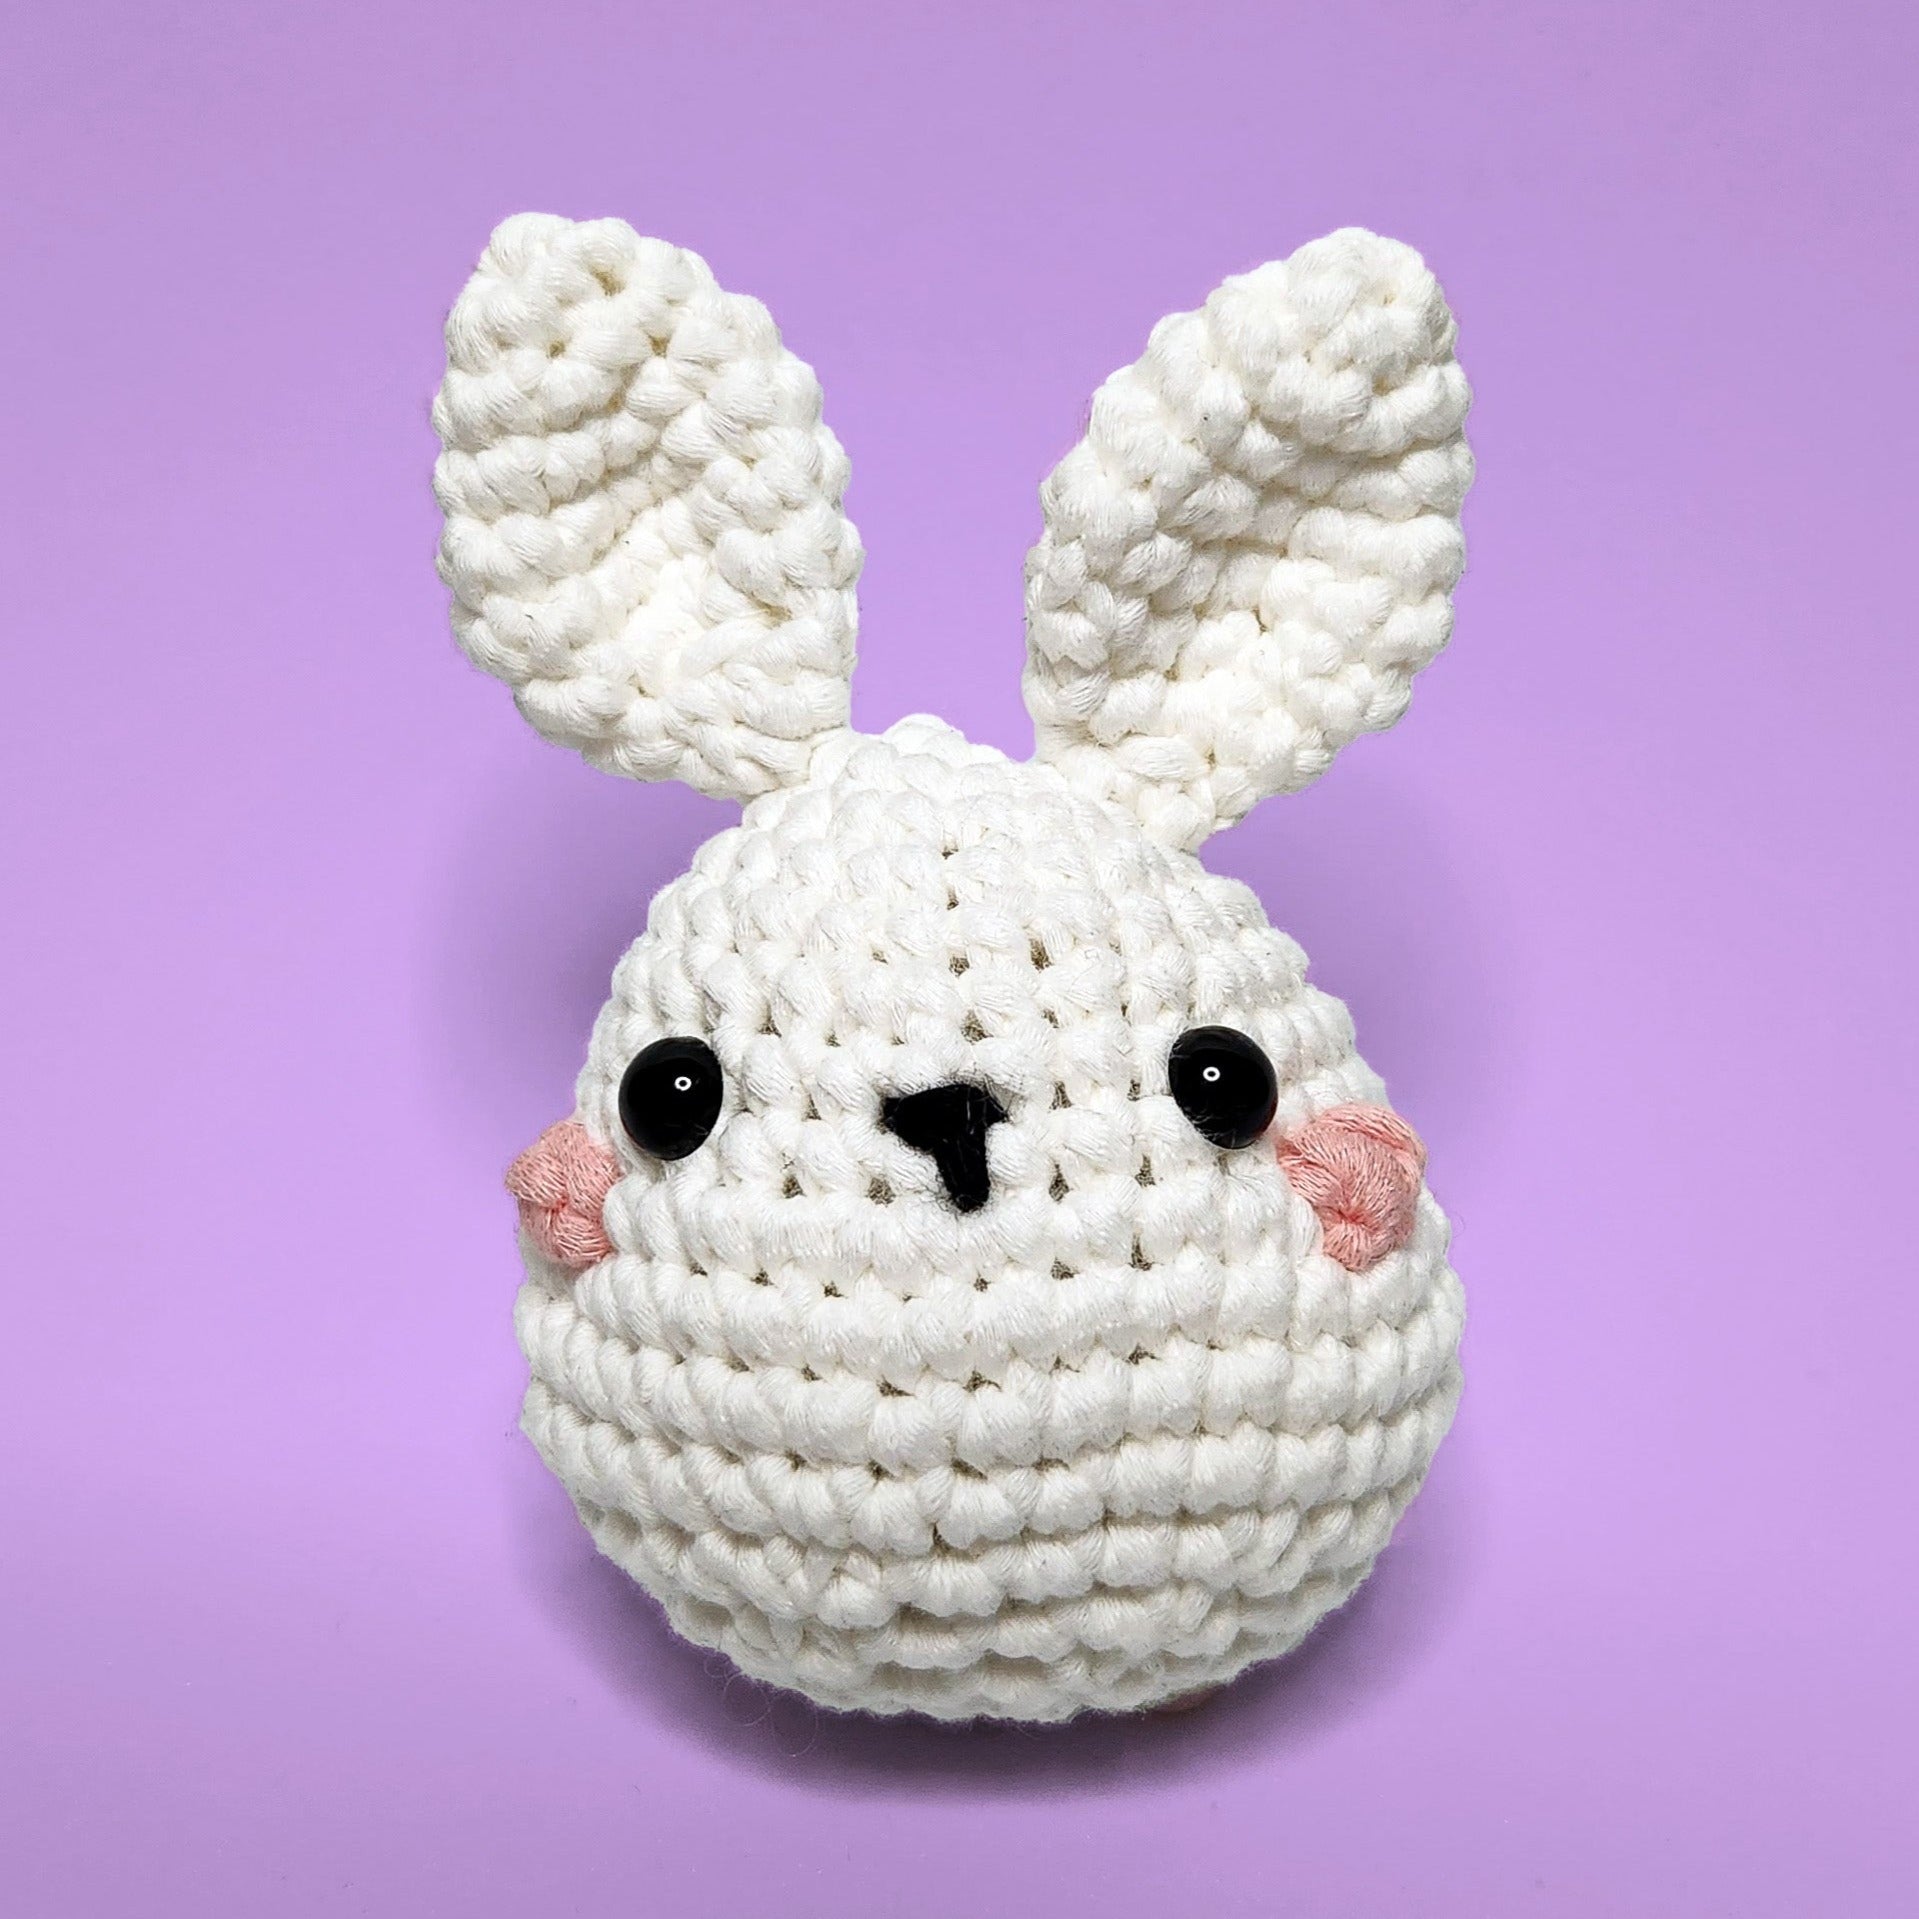 White bunny crochet amigurumi, handmade from our beginner crochet kit. Perfect as a handmade gifts for friends. Front view.